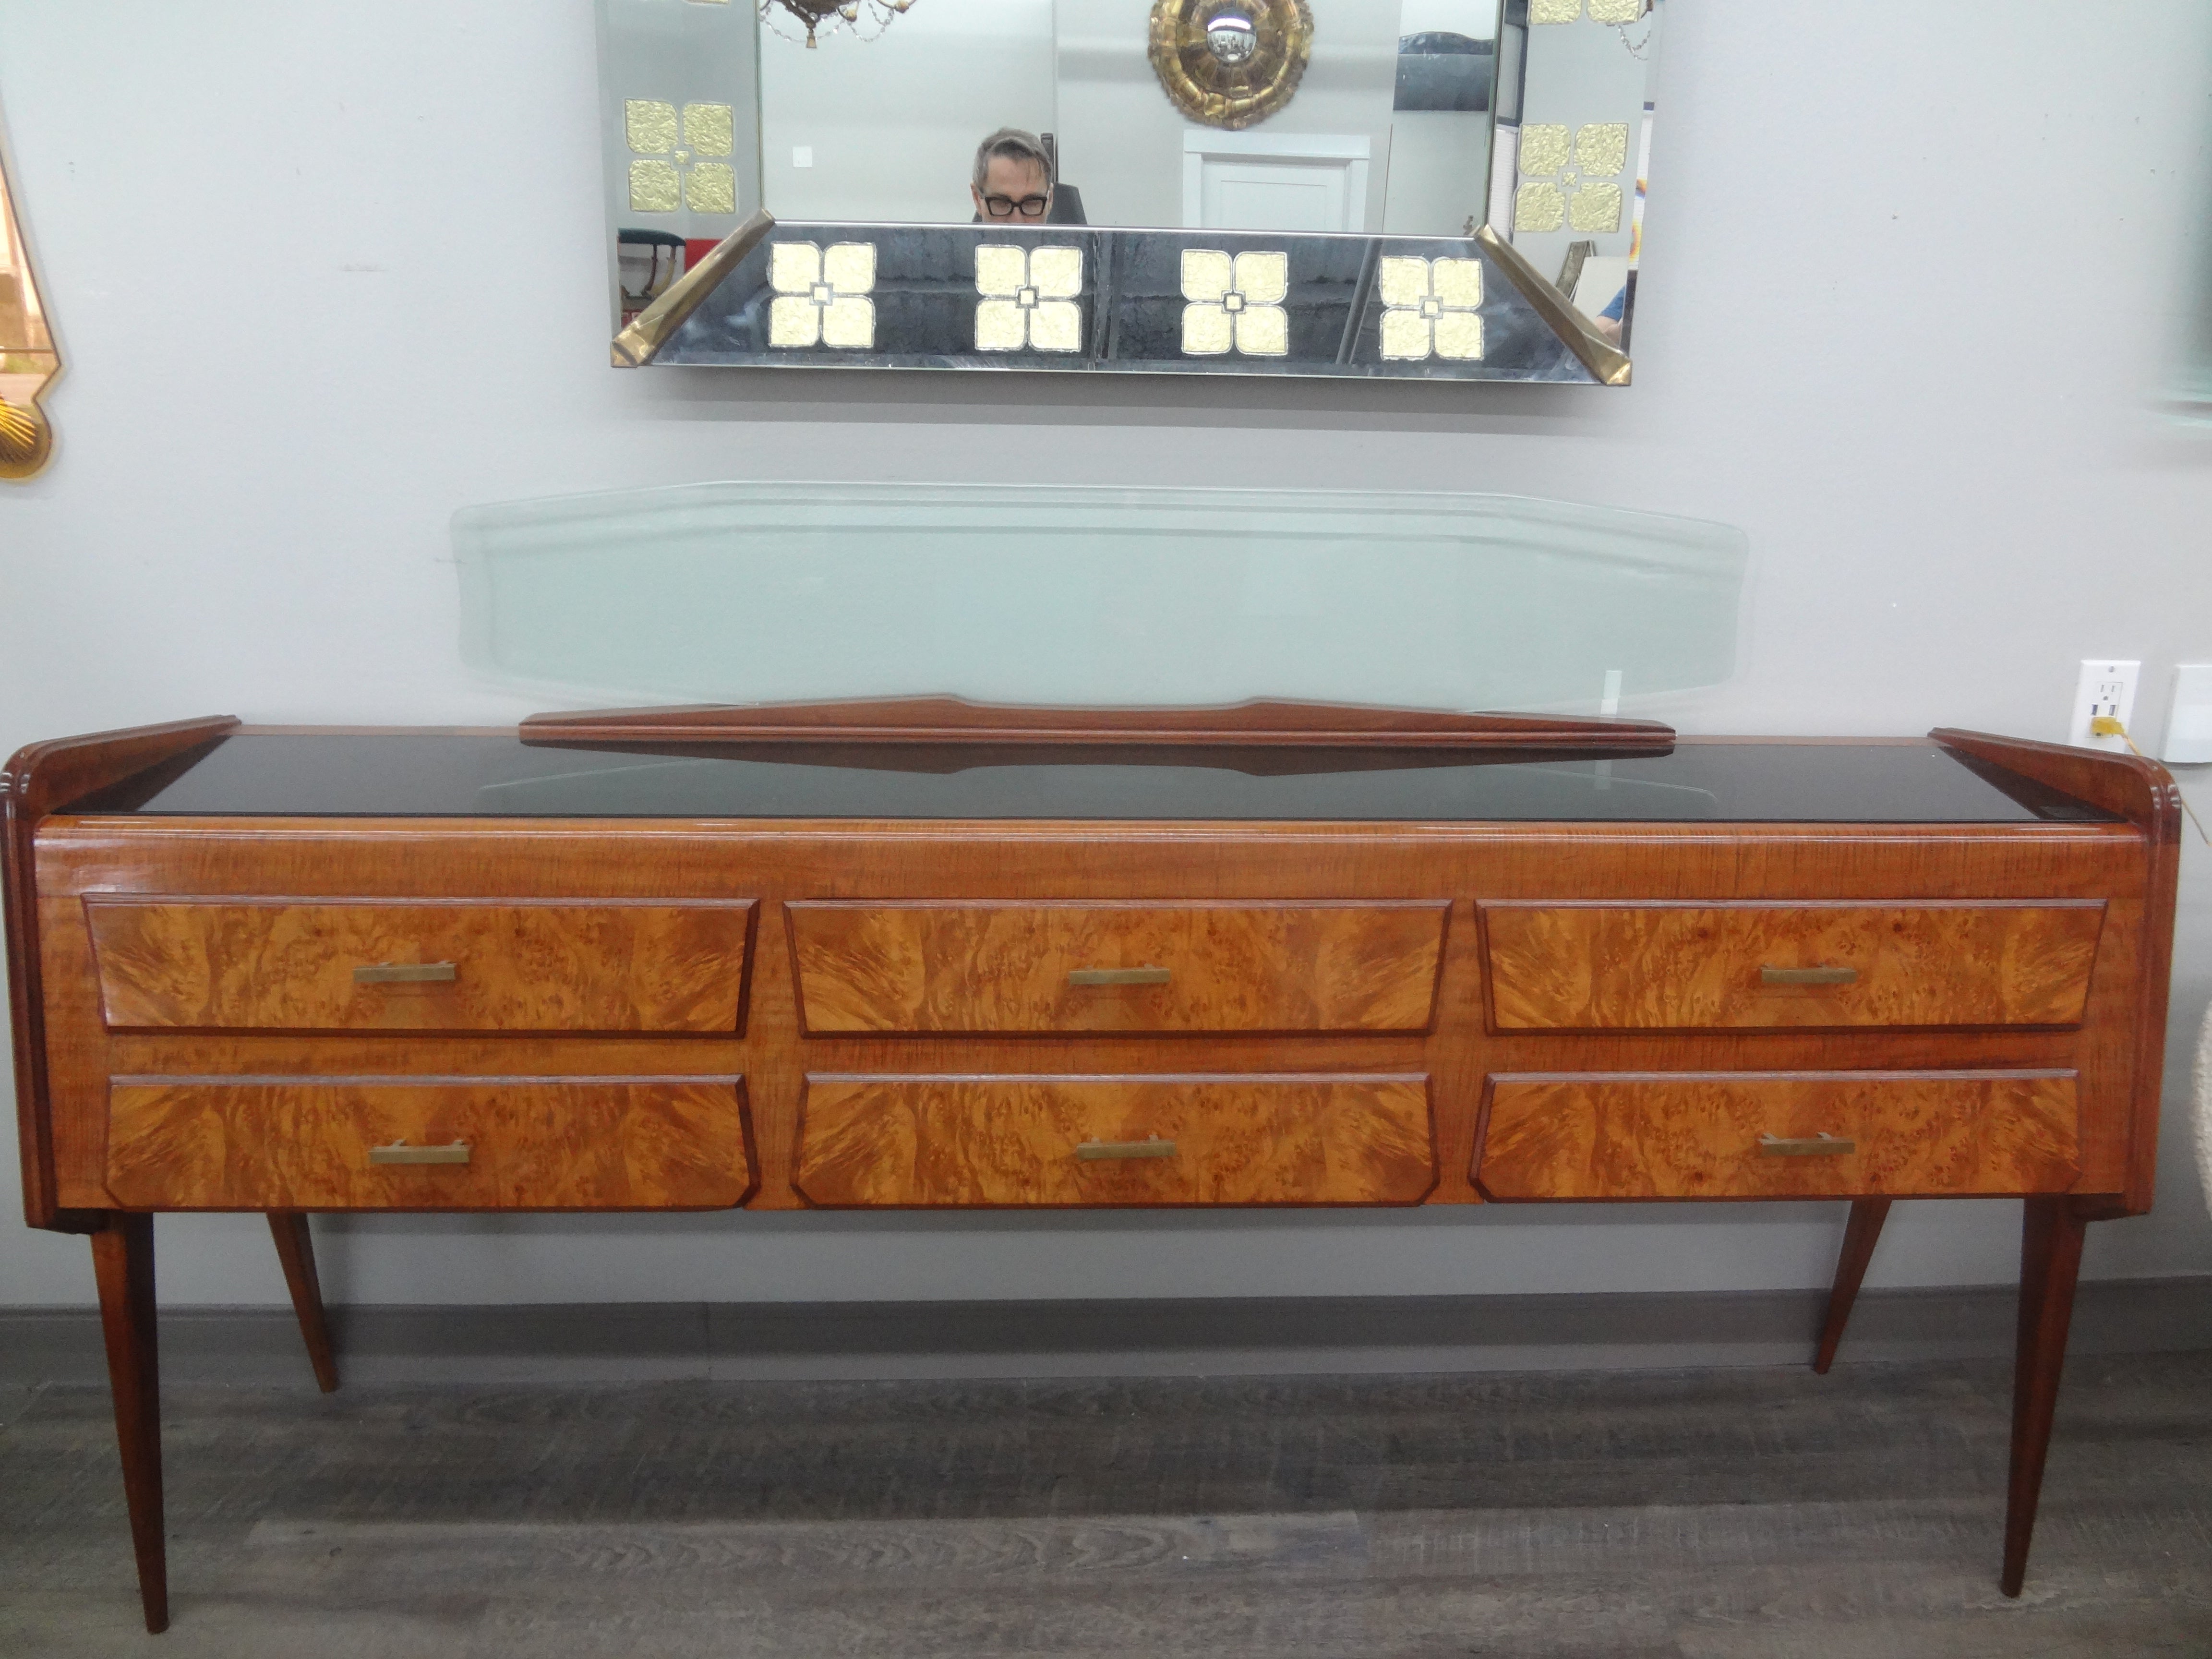 Italian Modern credenza after Ico Parisi.
This stunning Italian Mid-Century Modern credenza, commode or console table has shapely legs, six drawers with brass hardware, a black opaline top and an interesting clear glass backplate.
This outstanding